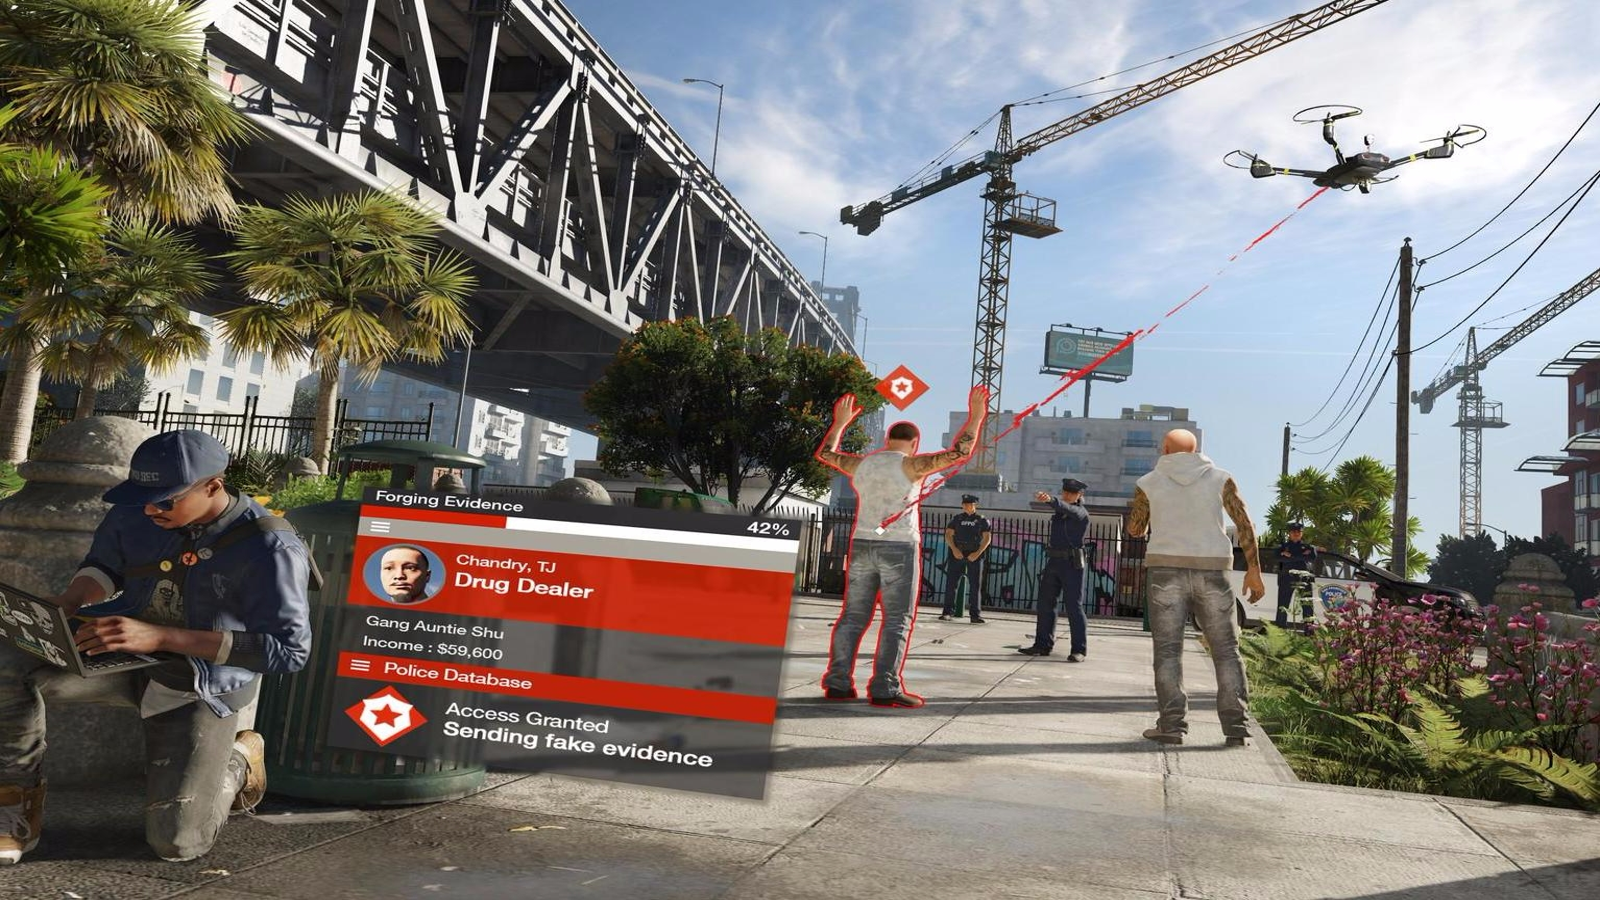 Fyrretræ Svin Hejse Watch Dogs 2 multiplayer modes tips: Cooperative Operations, Free Roam,  Hacking Invasions and Bounties explained | Eurogamer.net